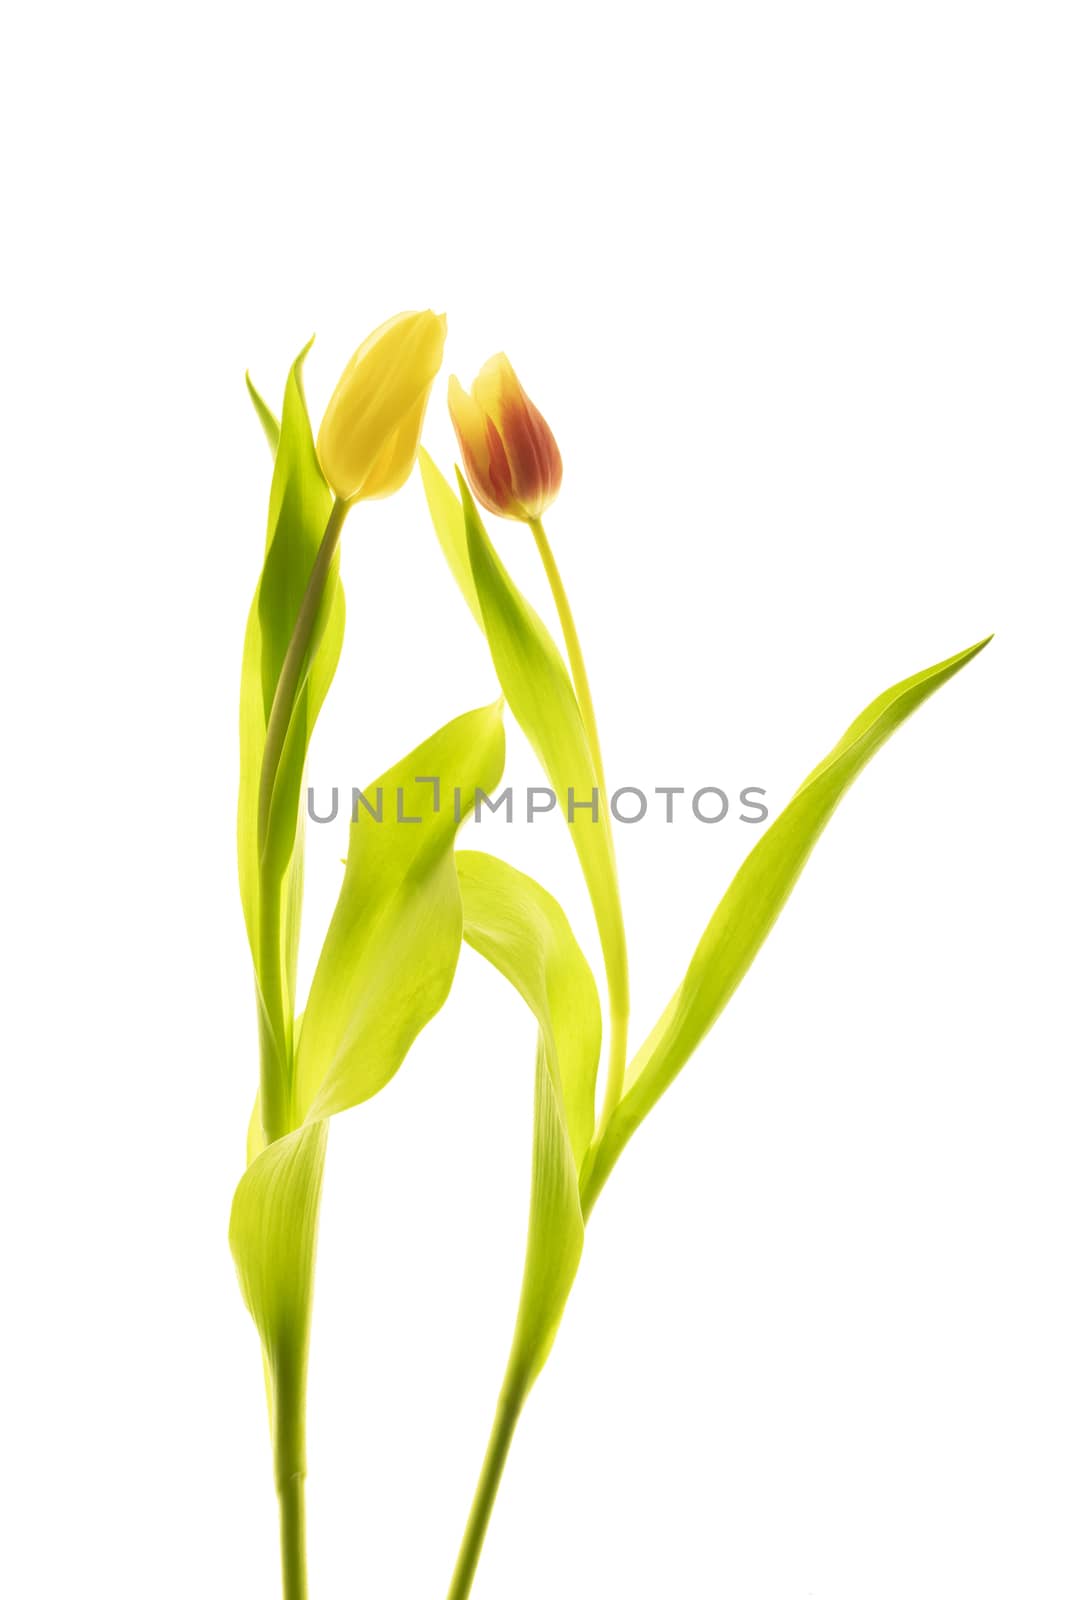 Tulips flower collection isolated on white background by sashokddt